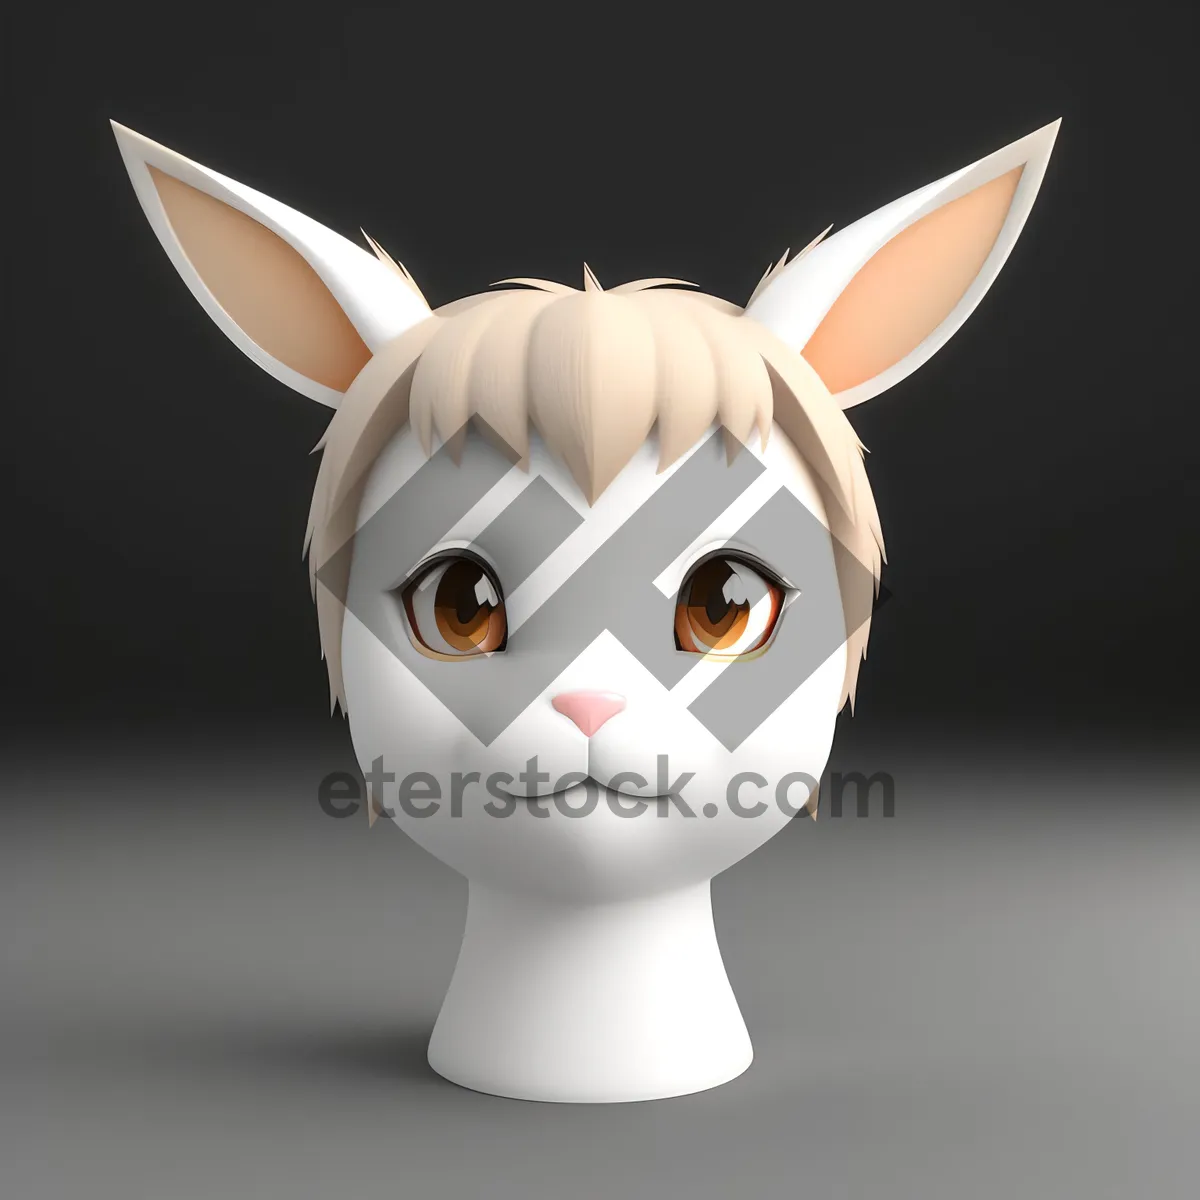 Picture of Bunny Fun: Cute and Funny 3D Cartoon Character with Big Ears